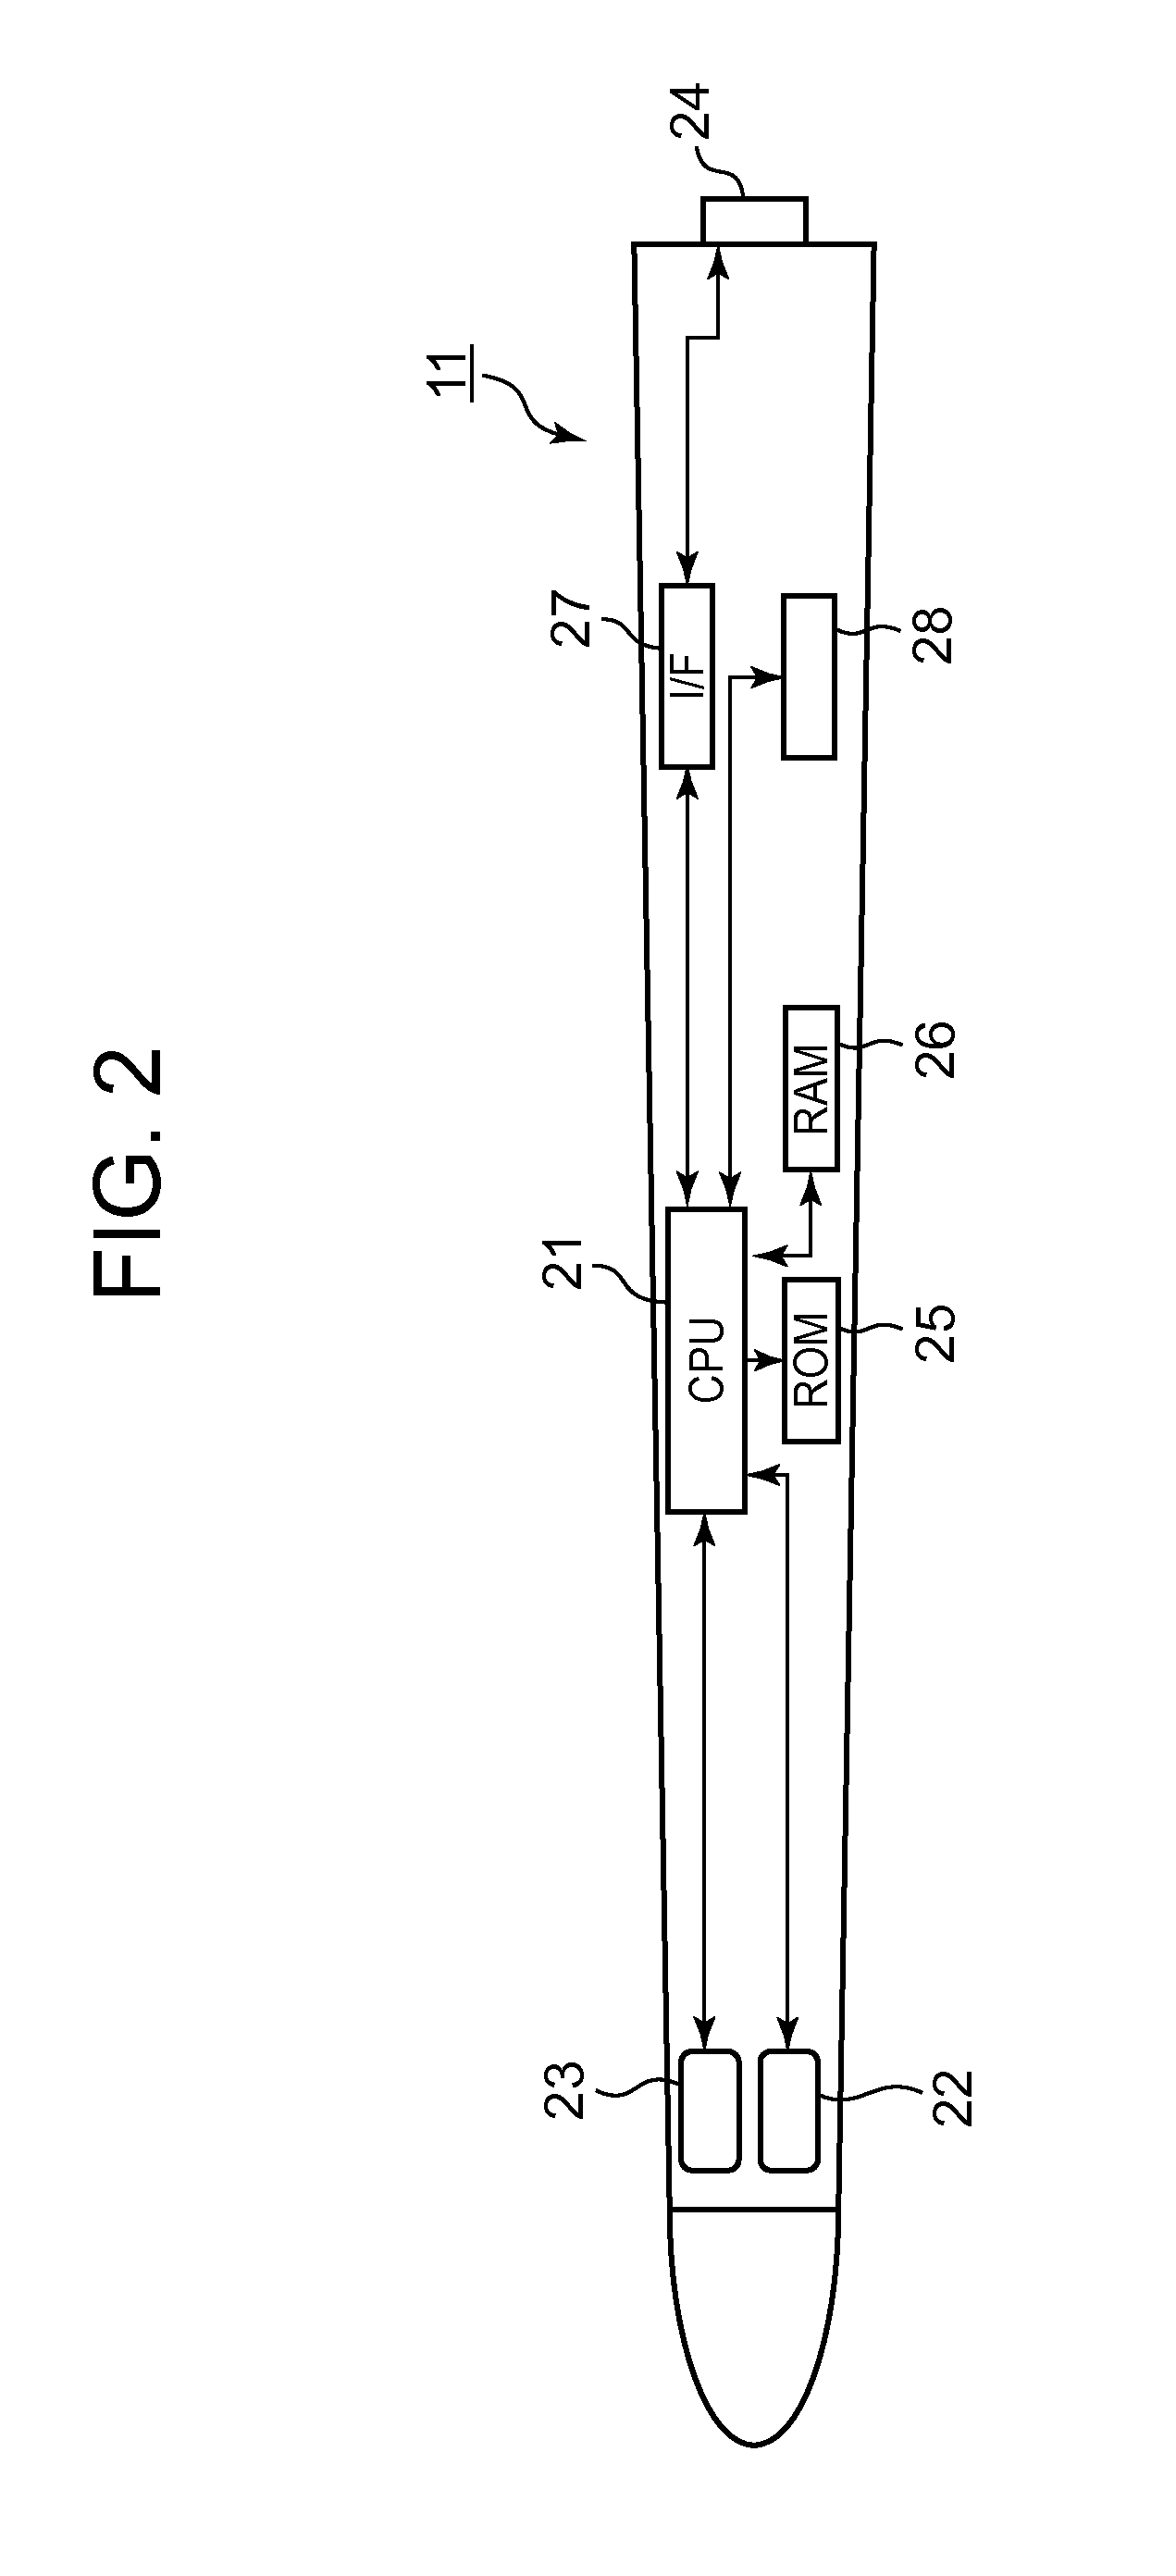 Performance apparatus and electronic musical instrument